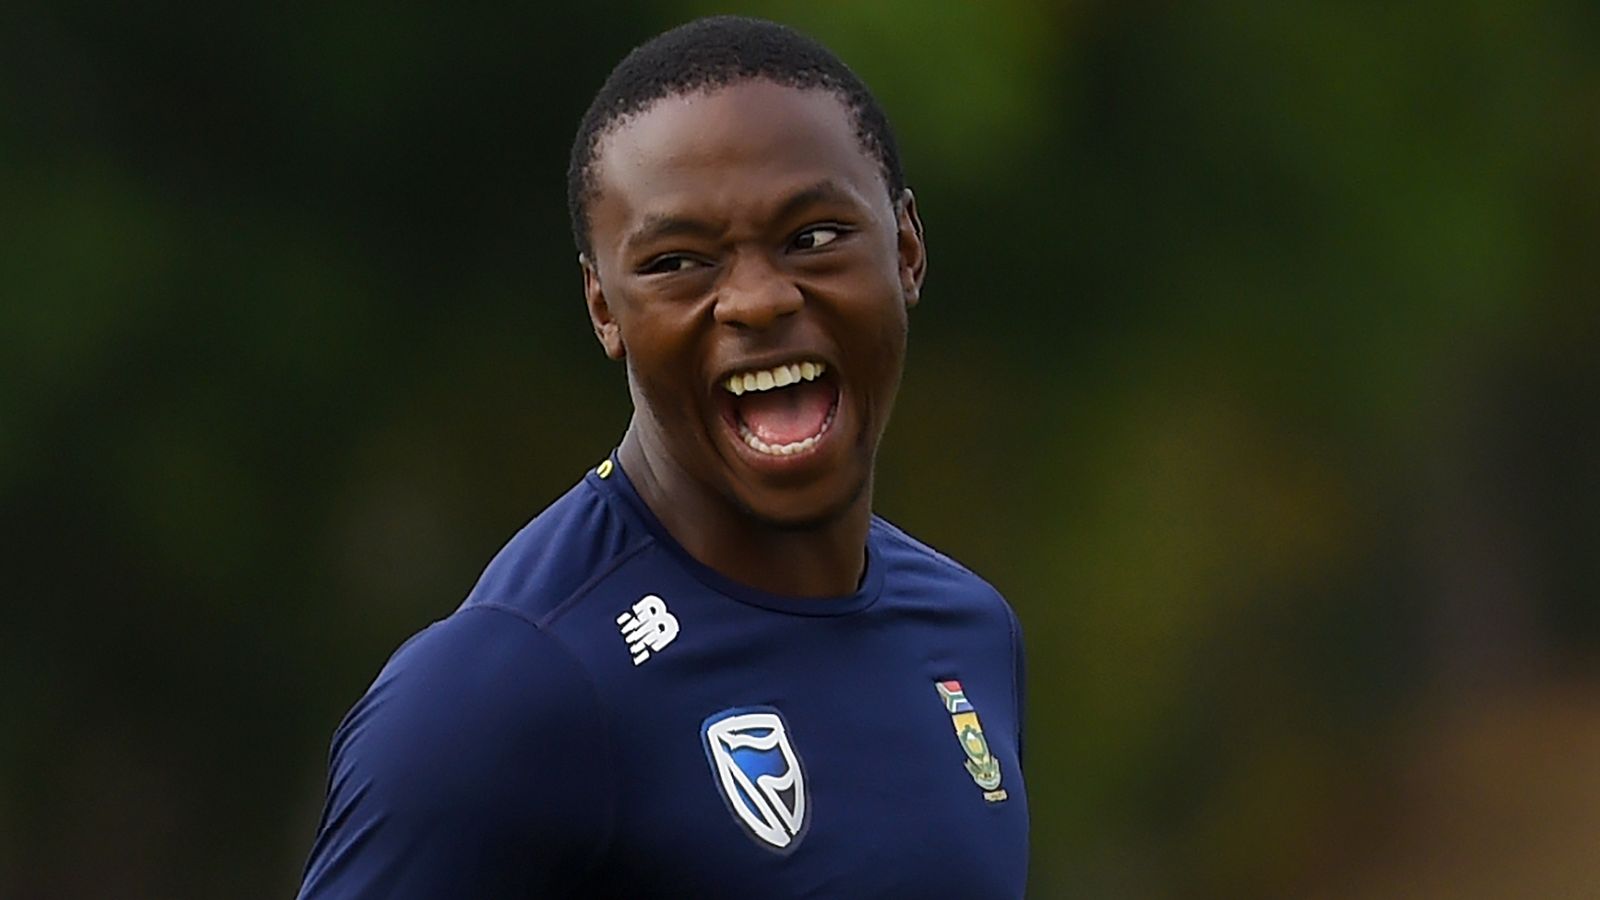 South Africa's Kagiso Rabada dominant force across all formats of